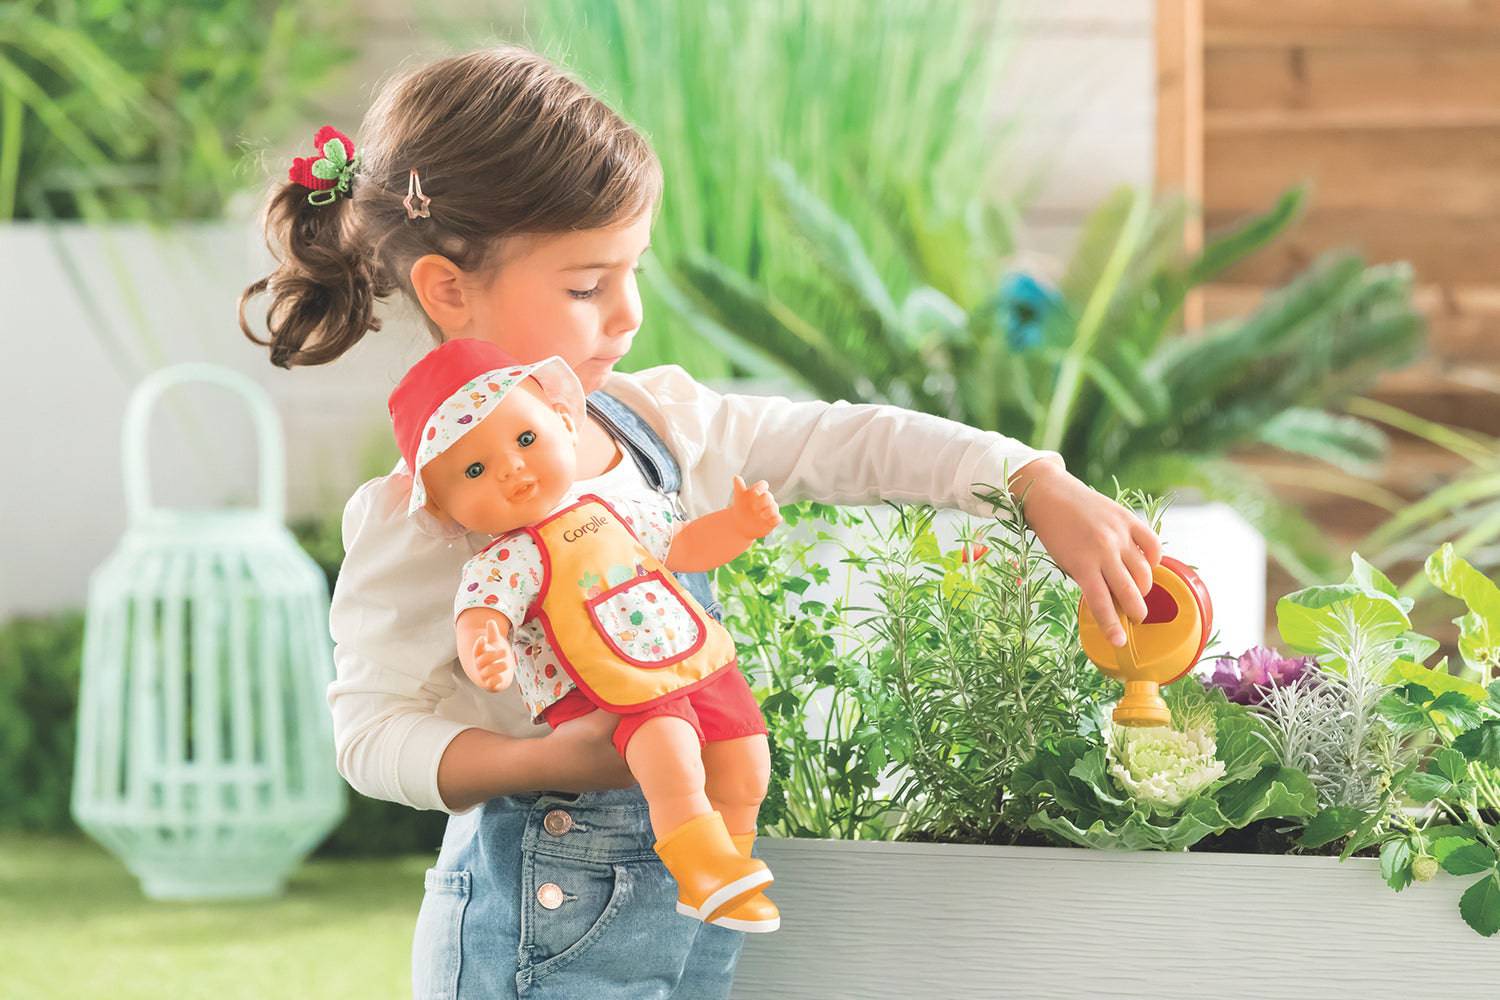 Charly Gardening Doll - A Child's Delight